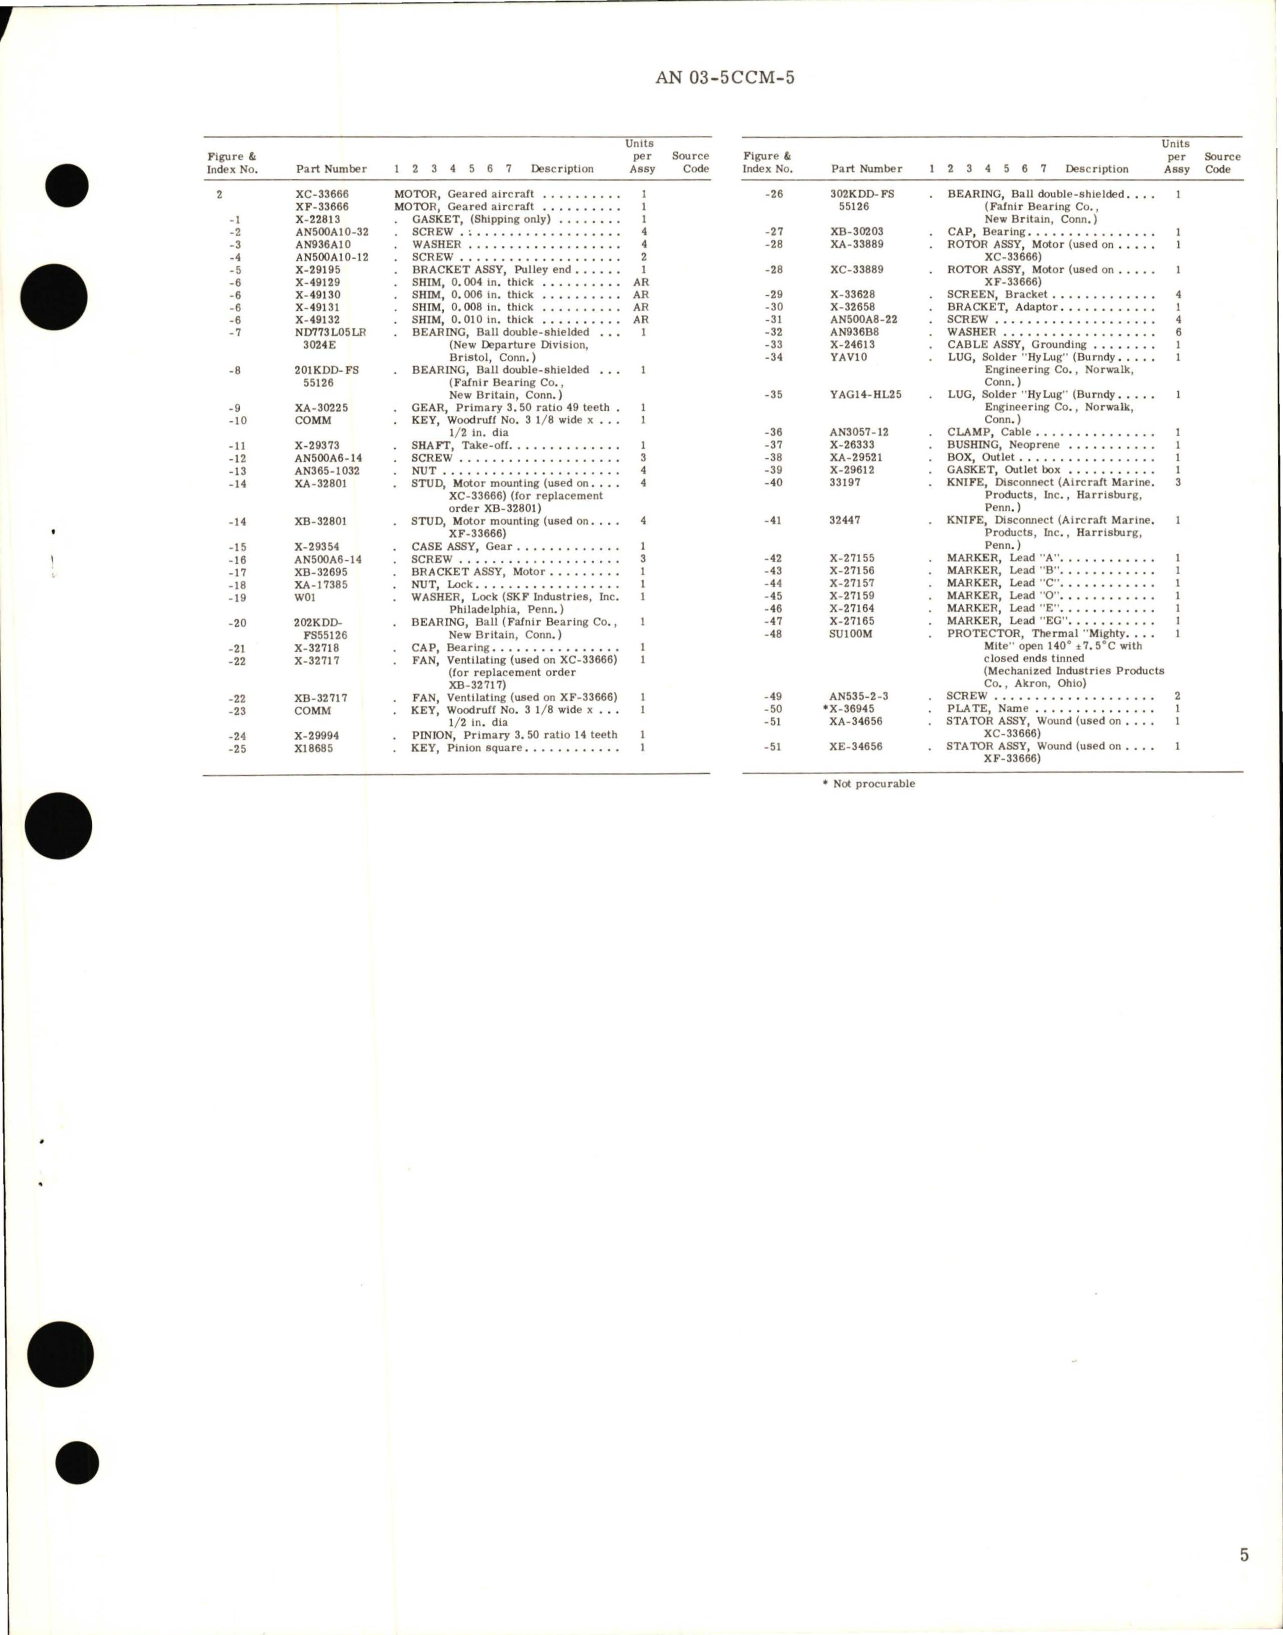 Sample page 5 from AirCorps Library document: Overhaul Instructions with Parts Breakdown for Geared Aircraft Motors - Part XC-3666 and XF-33666 